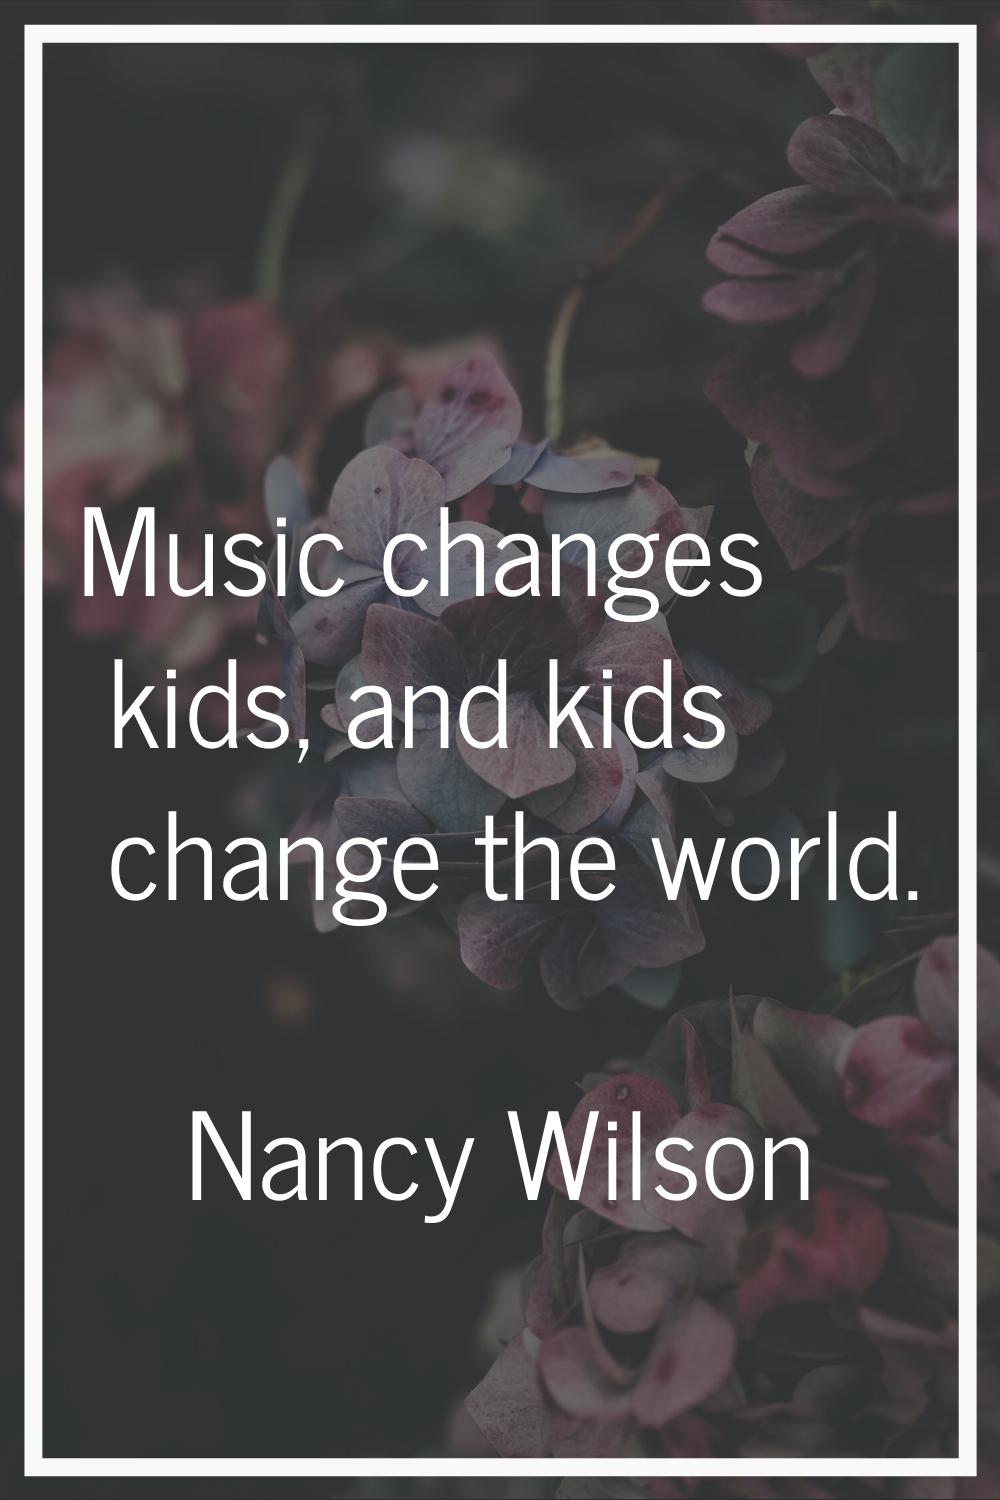 Music changes kids, and kids change the world.